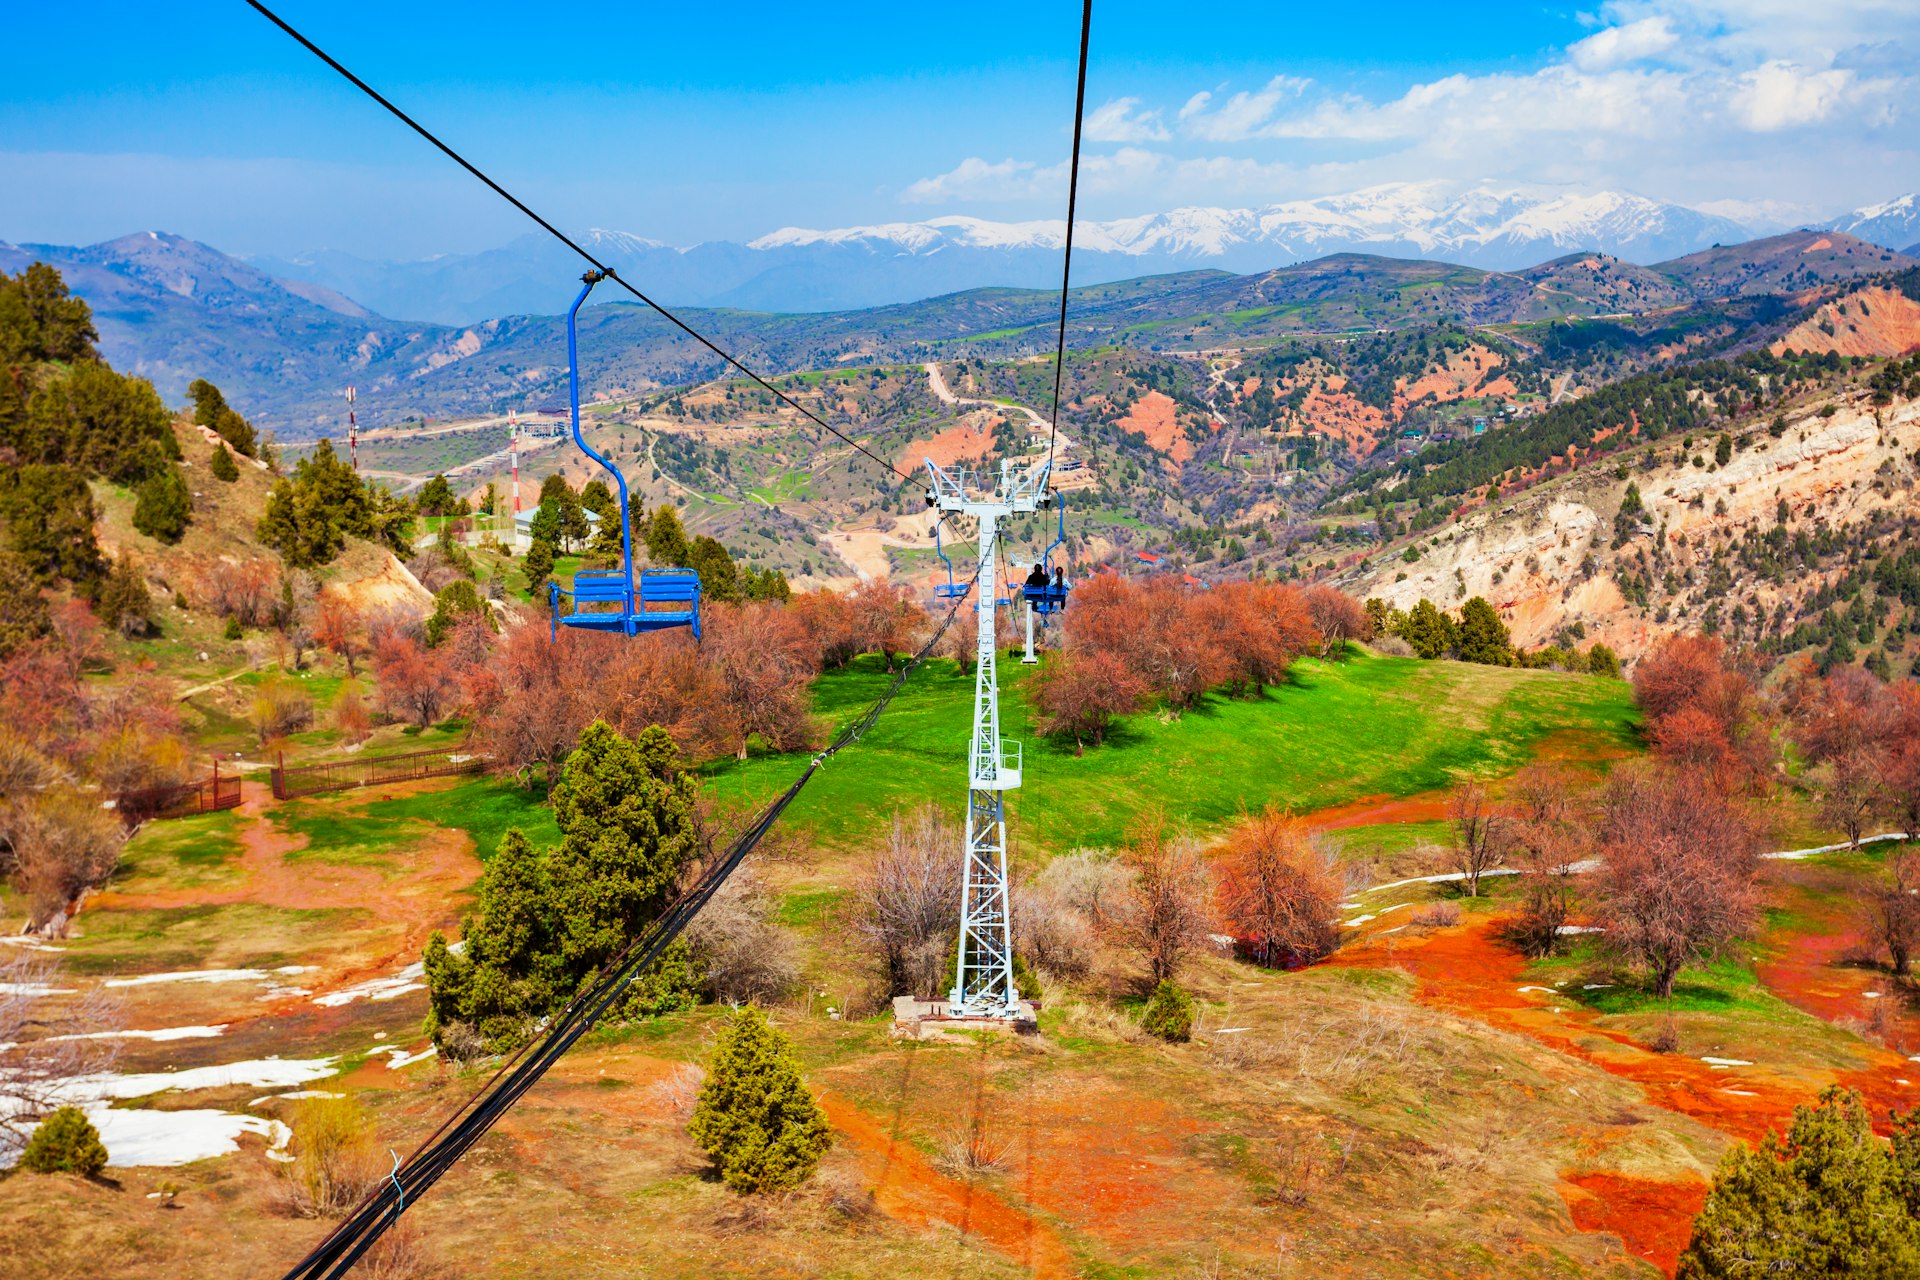 An aerial view of people riding a sky tram into a green valley framed by mountains in Uzbekistan